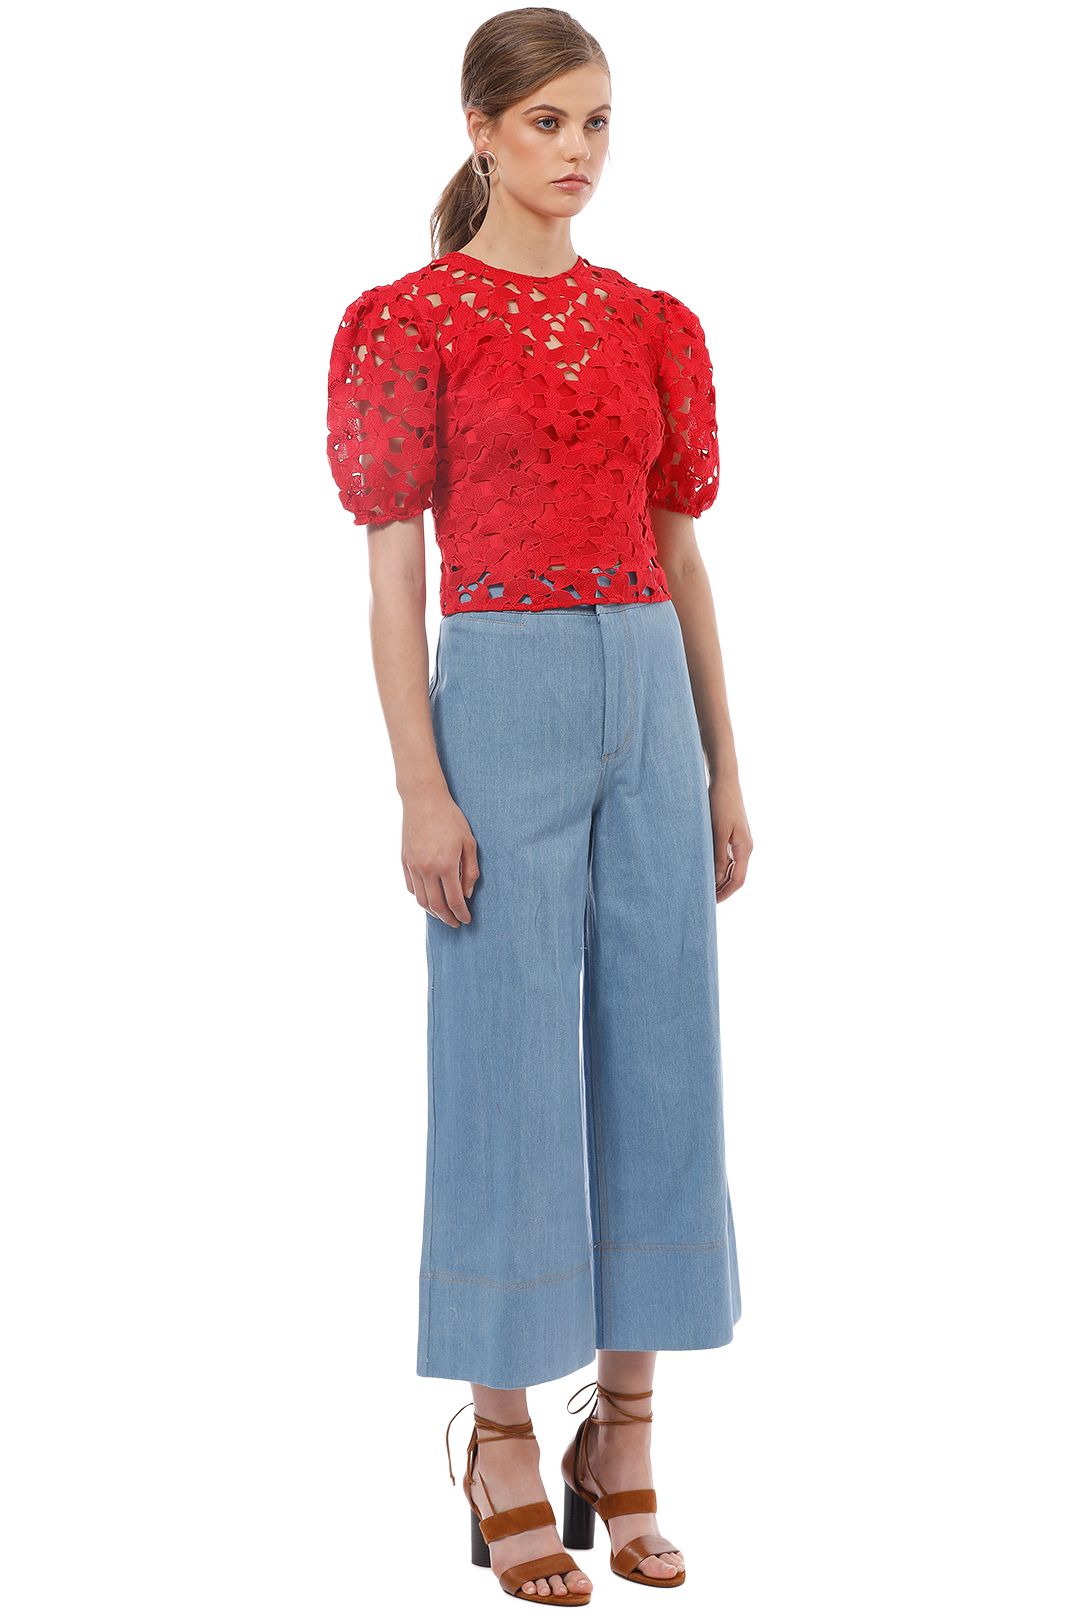 Keepsake the Label - Headlines Lace Top - Red - Side